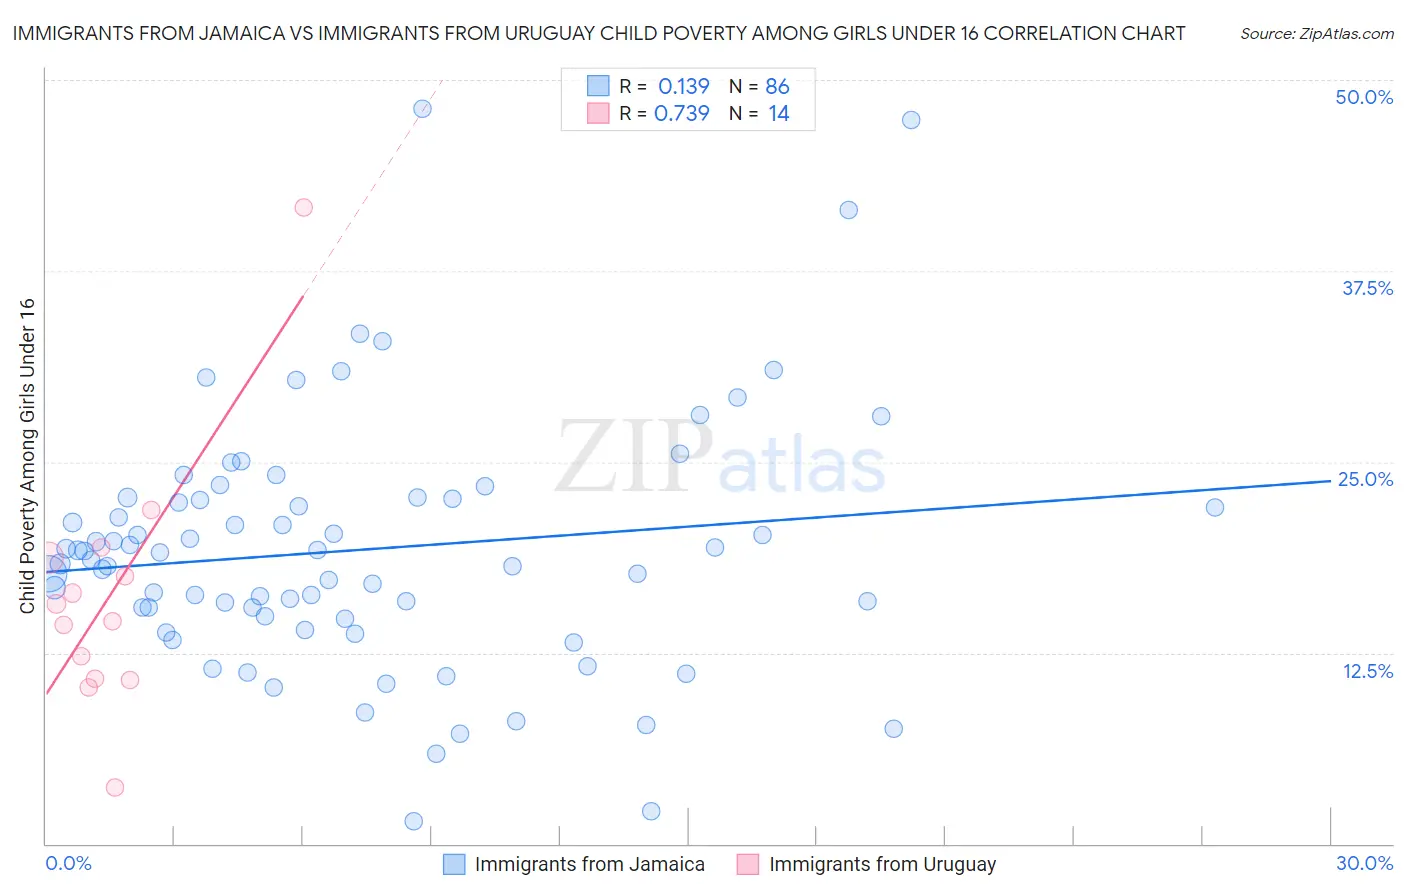 Immigrants from Jamaica vs Immigrants from Uruguay Child Poverty Among Girls Under 16